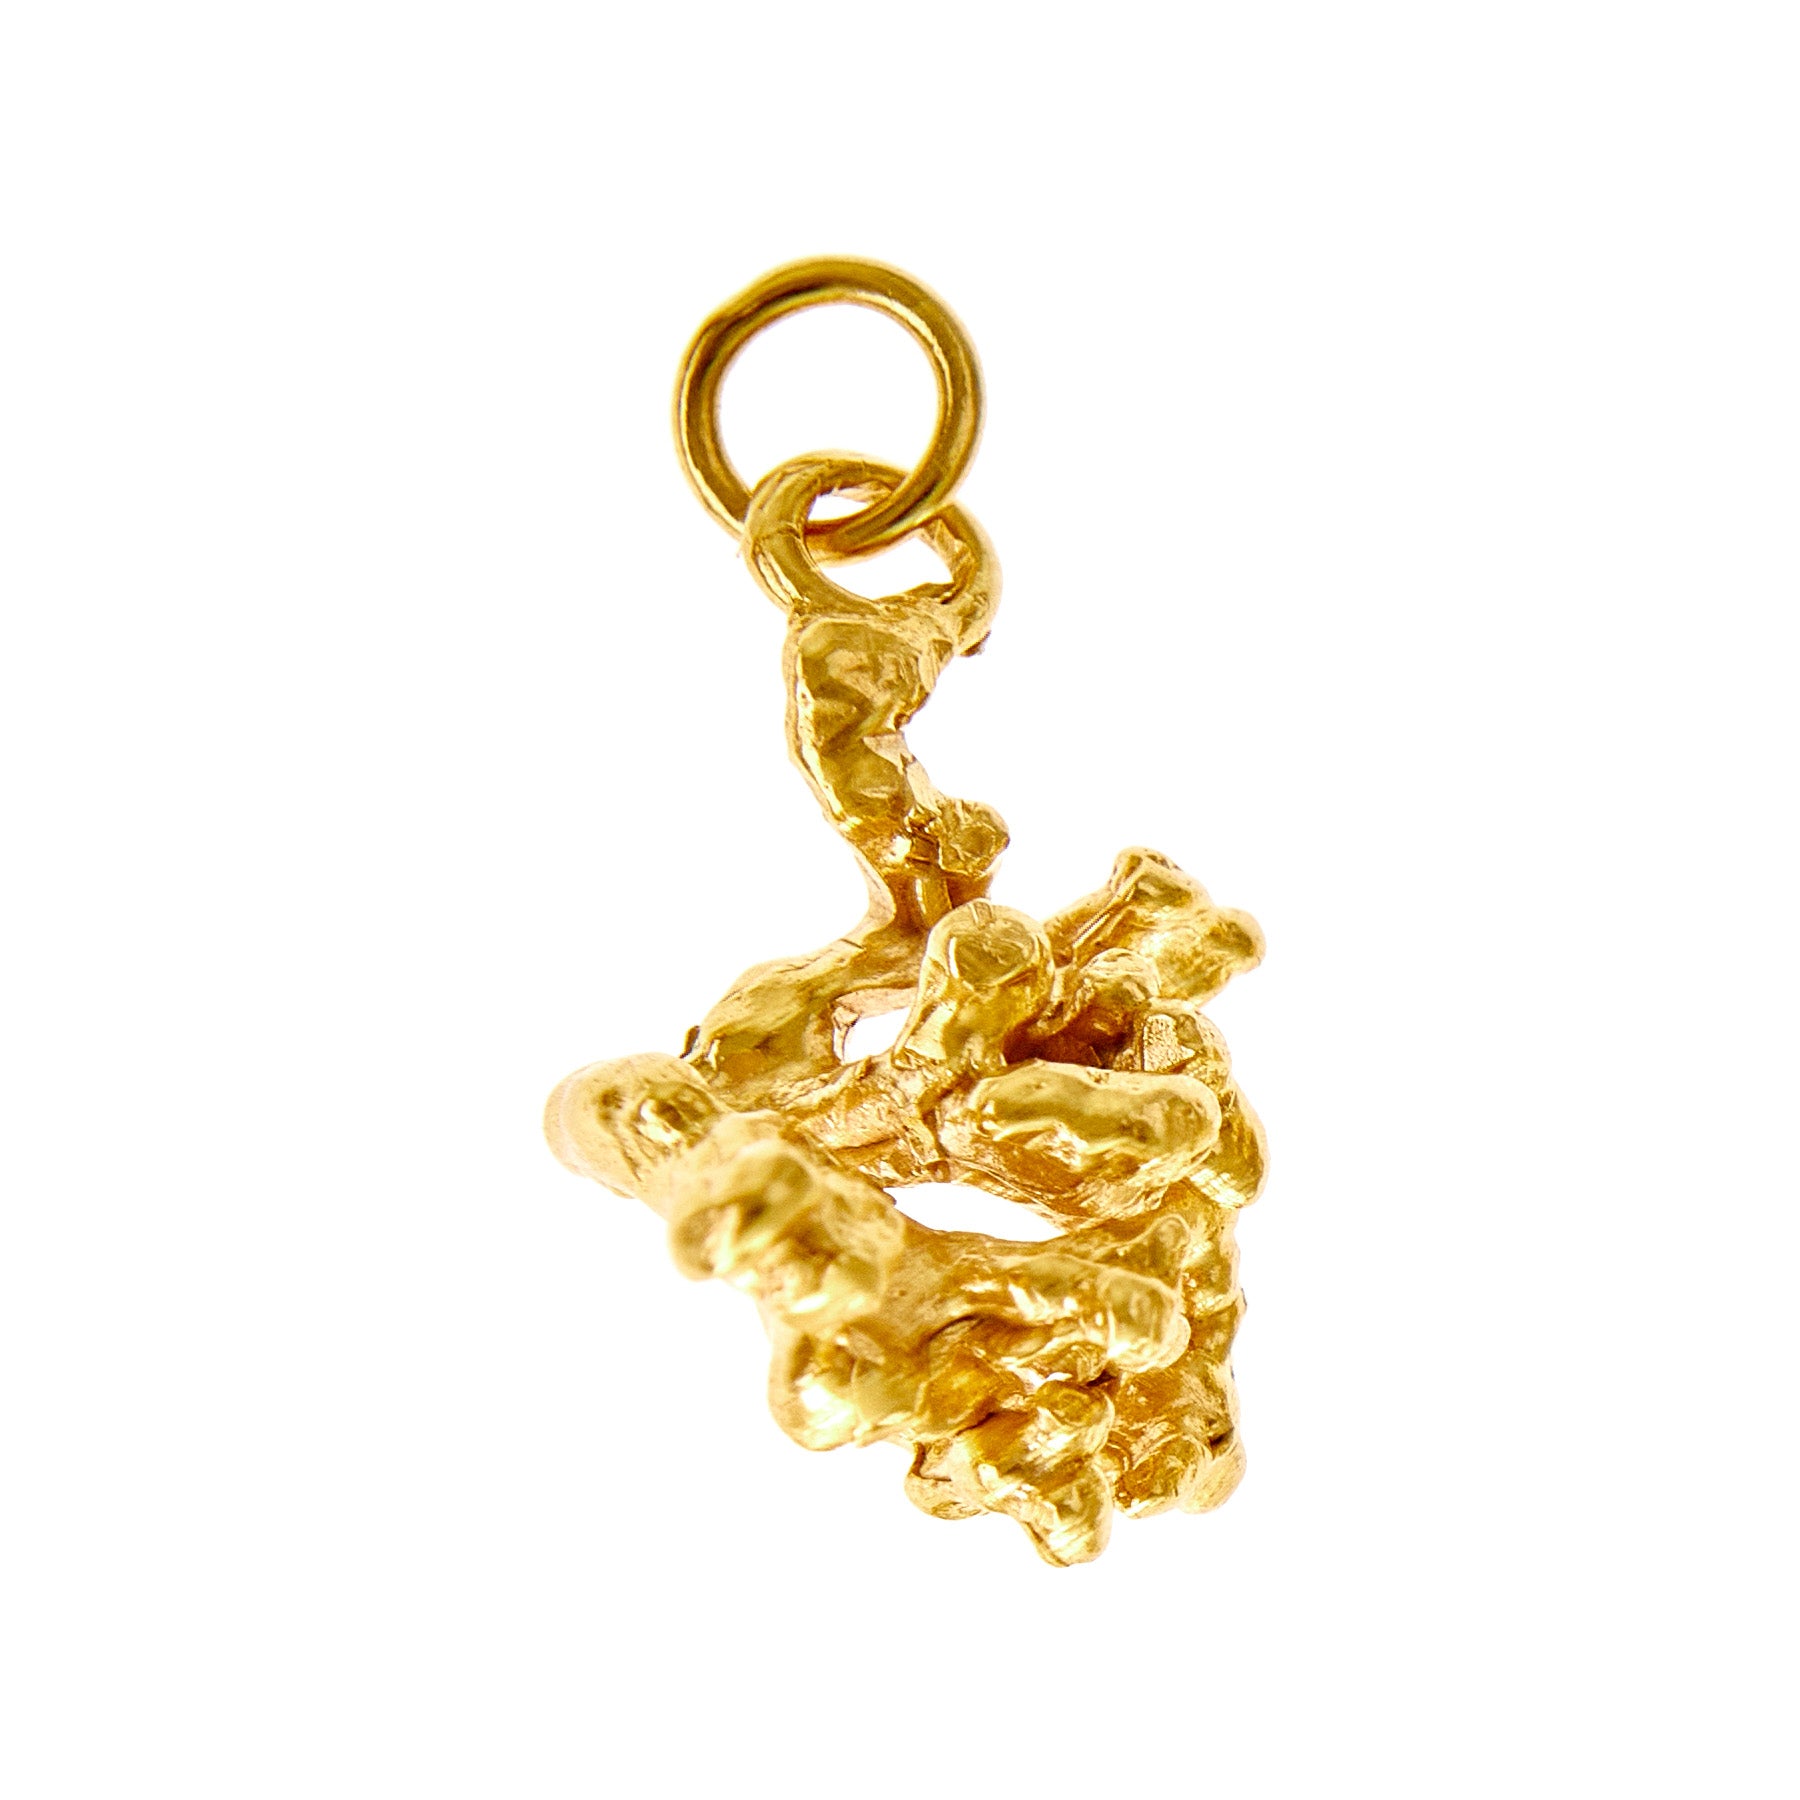 Corallia Hydor Charm - Gold Plated Brass